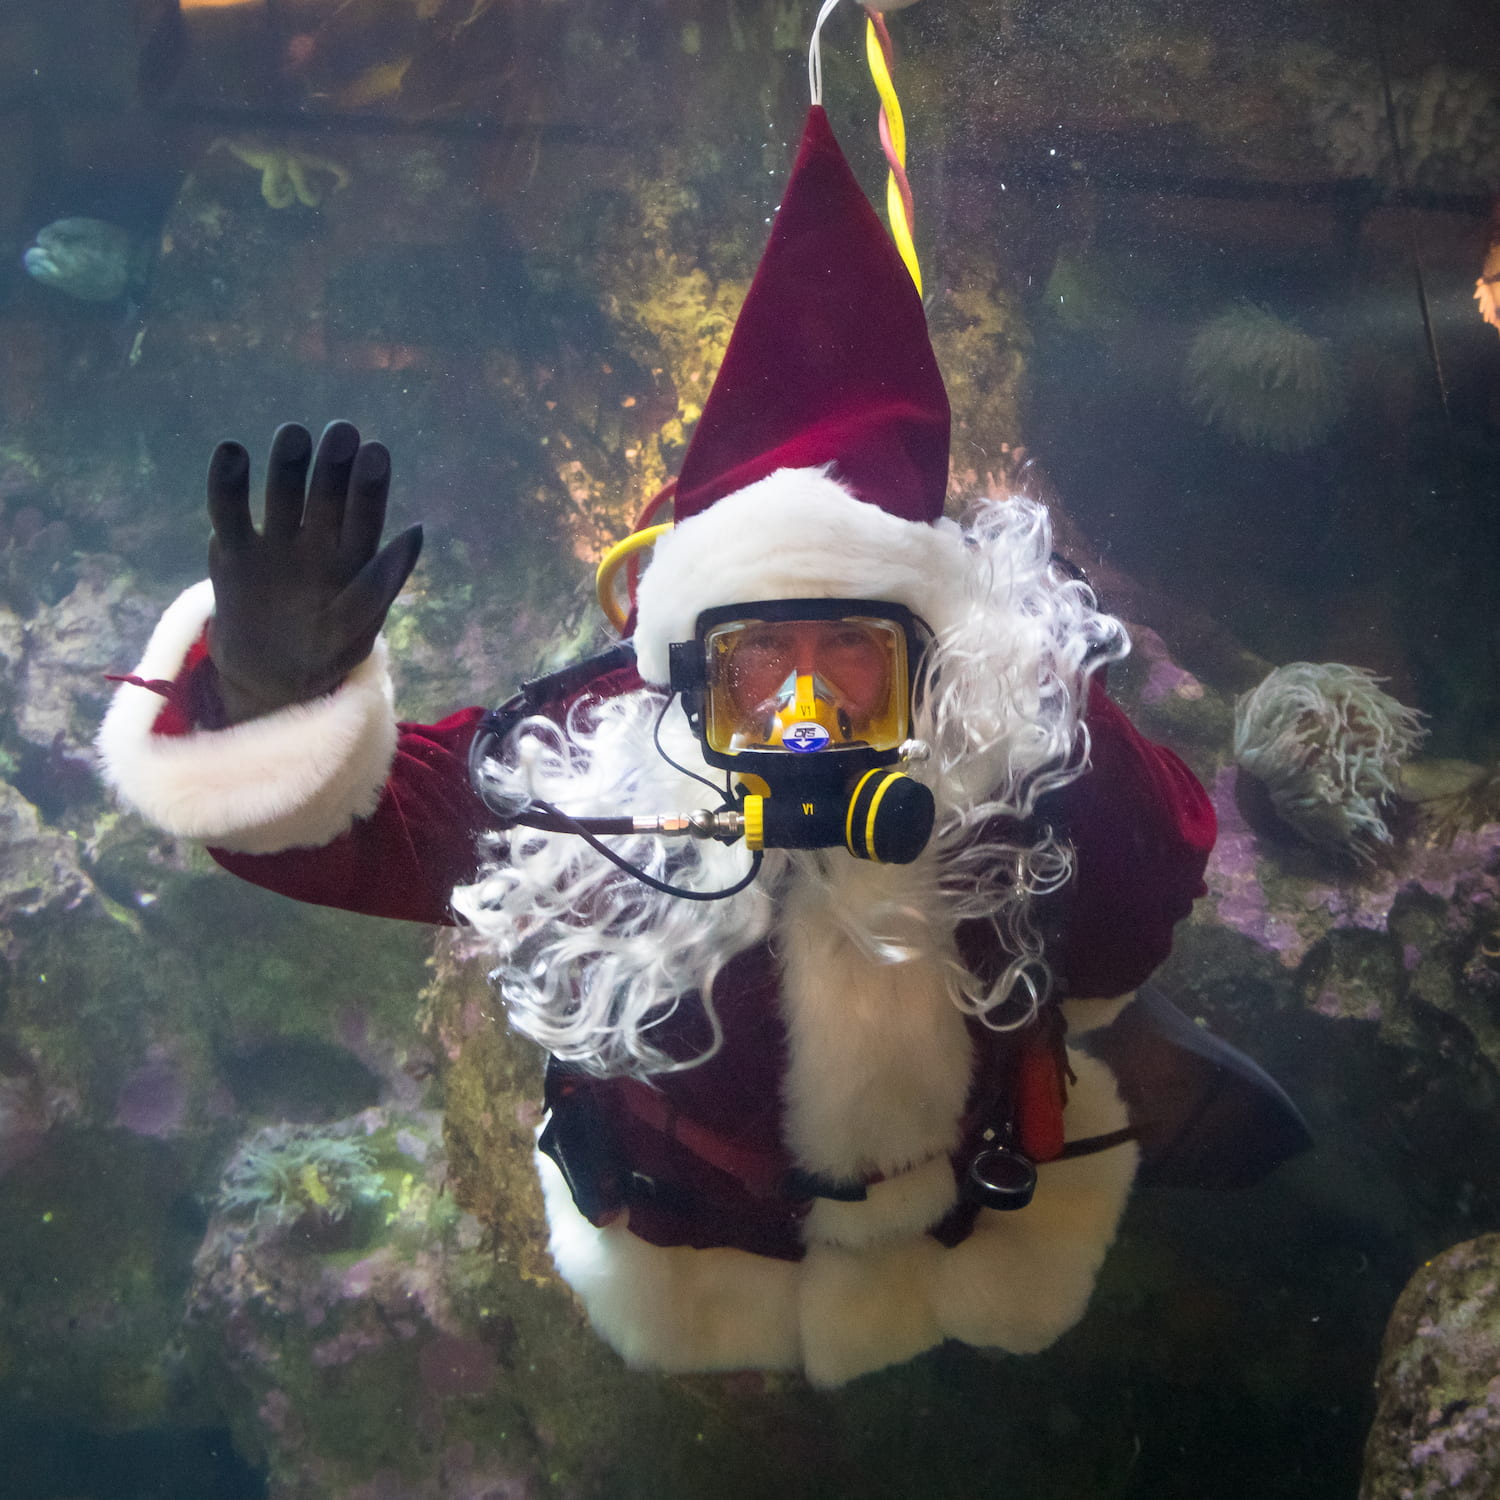 A diver wearing a Santa suit and a long, white beard smiles and waves at the camera from underwater.